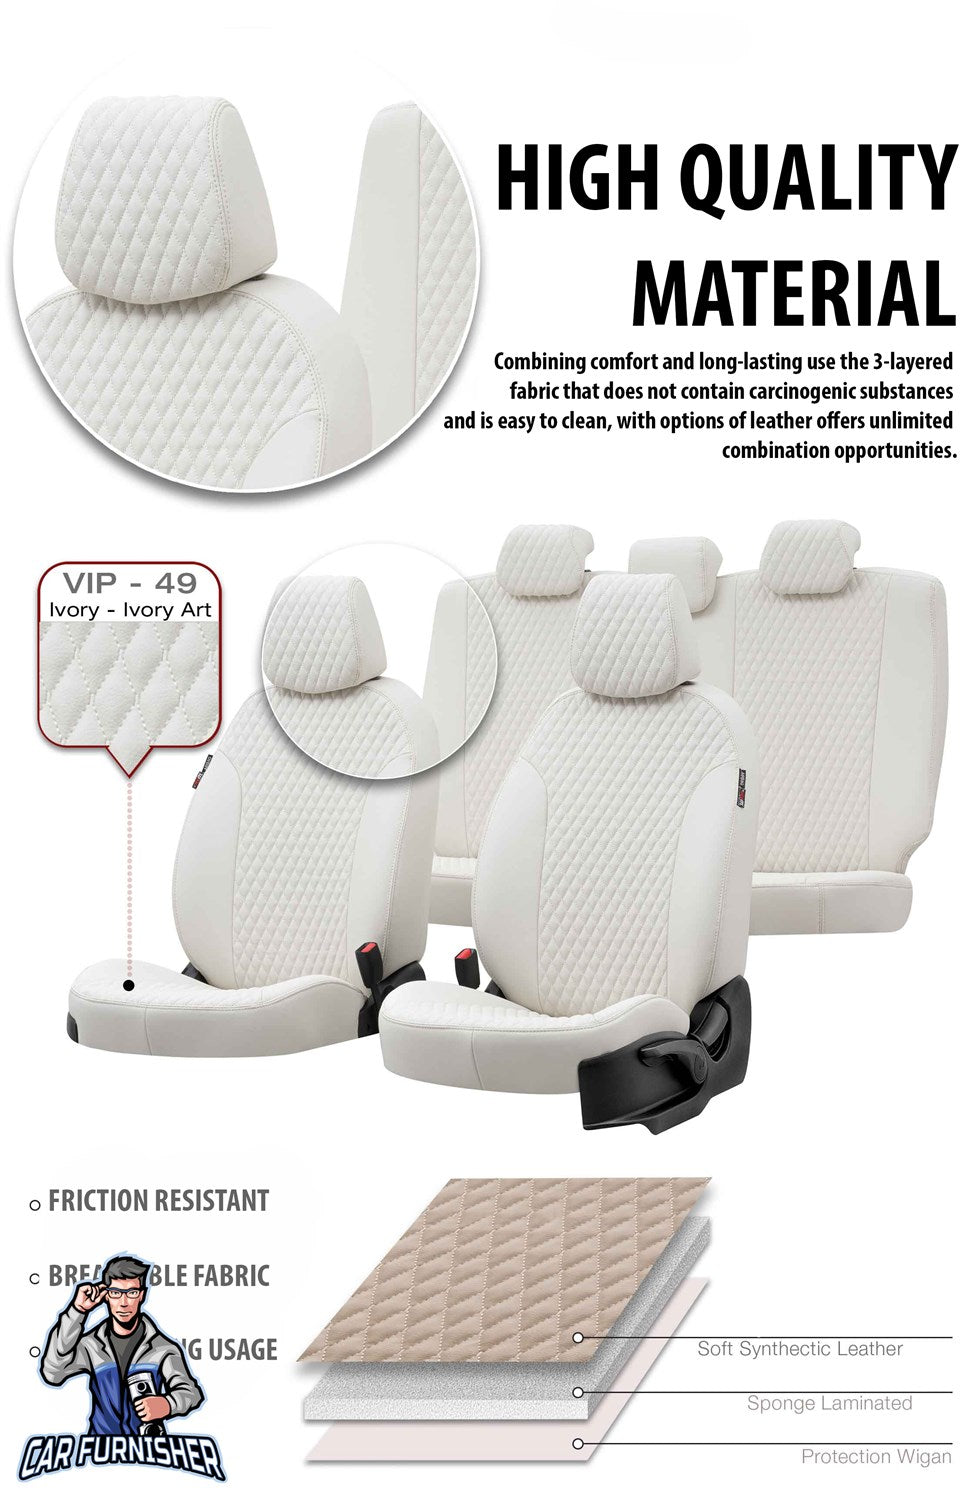 Isuzu Nlr Seat Covers Amsterdam Leather Design Red Leather